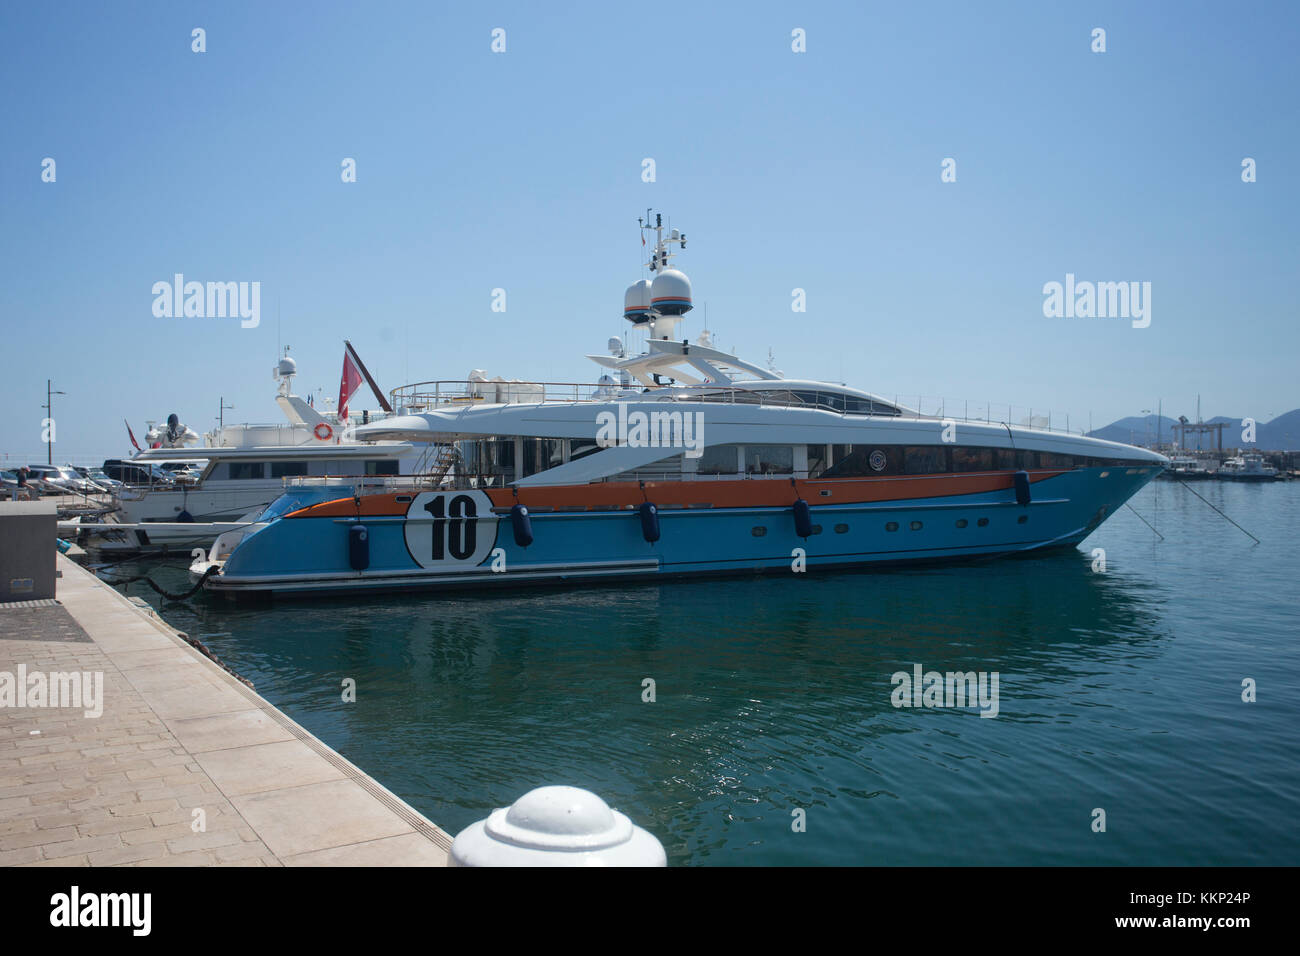 Gulf Racing inspired yacht 'Aurelia' in Cannes harbour in summer Stock Photo